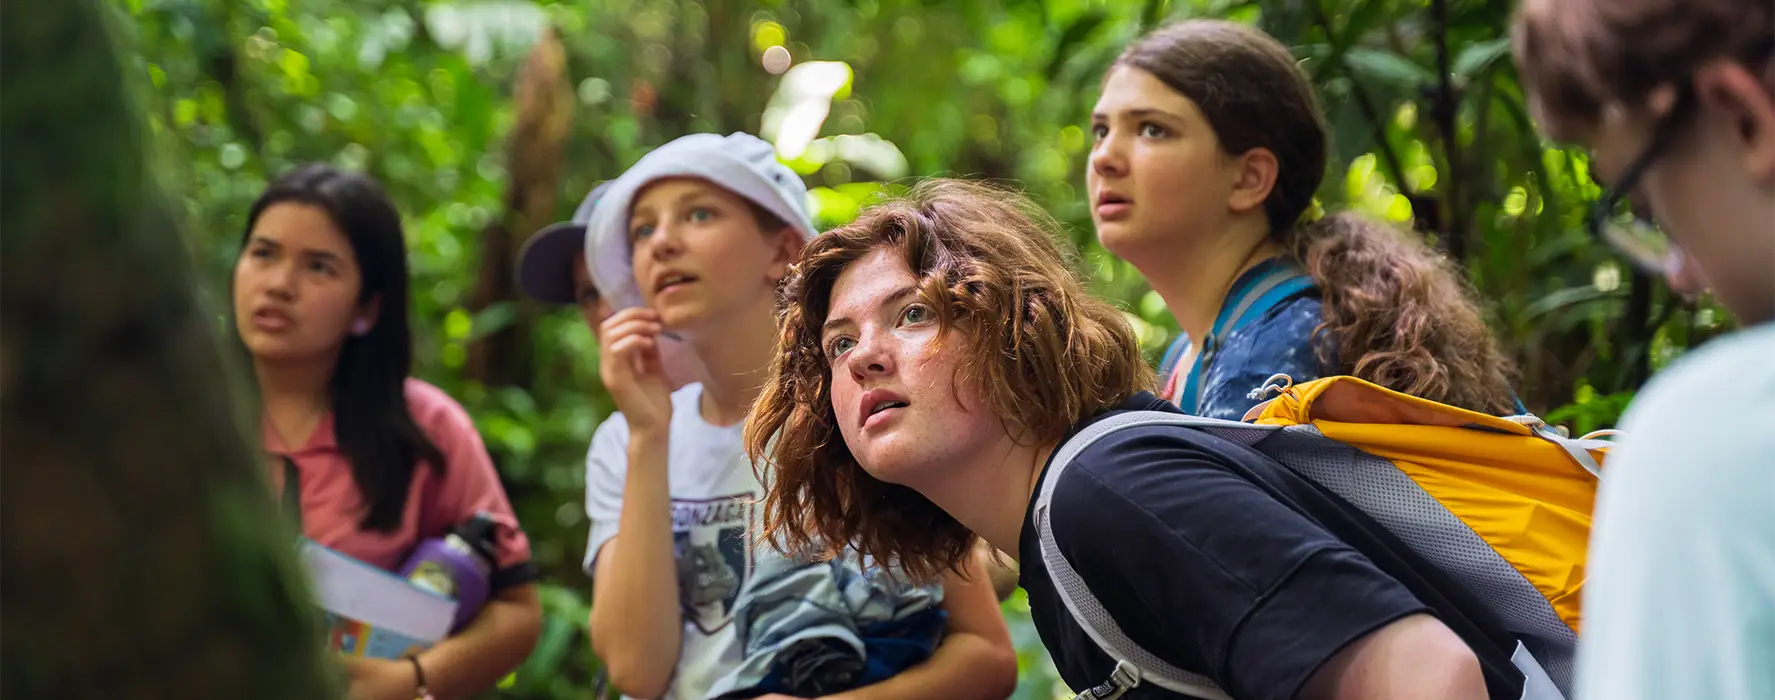 A group of 6 students in a Costa Rican rainforest look at something in the distance.